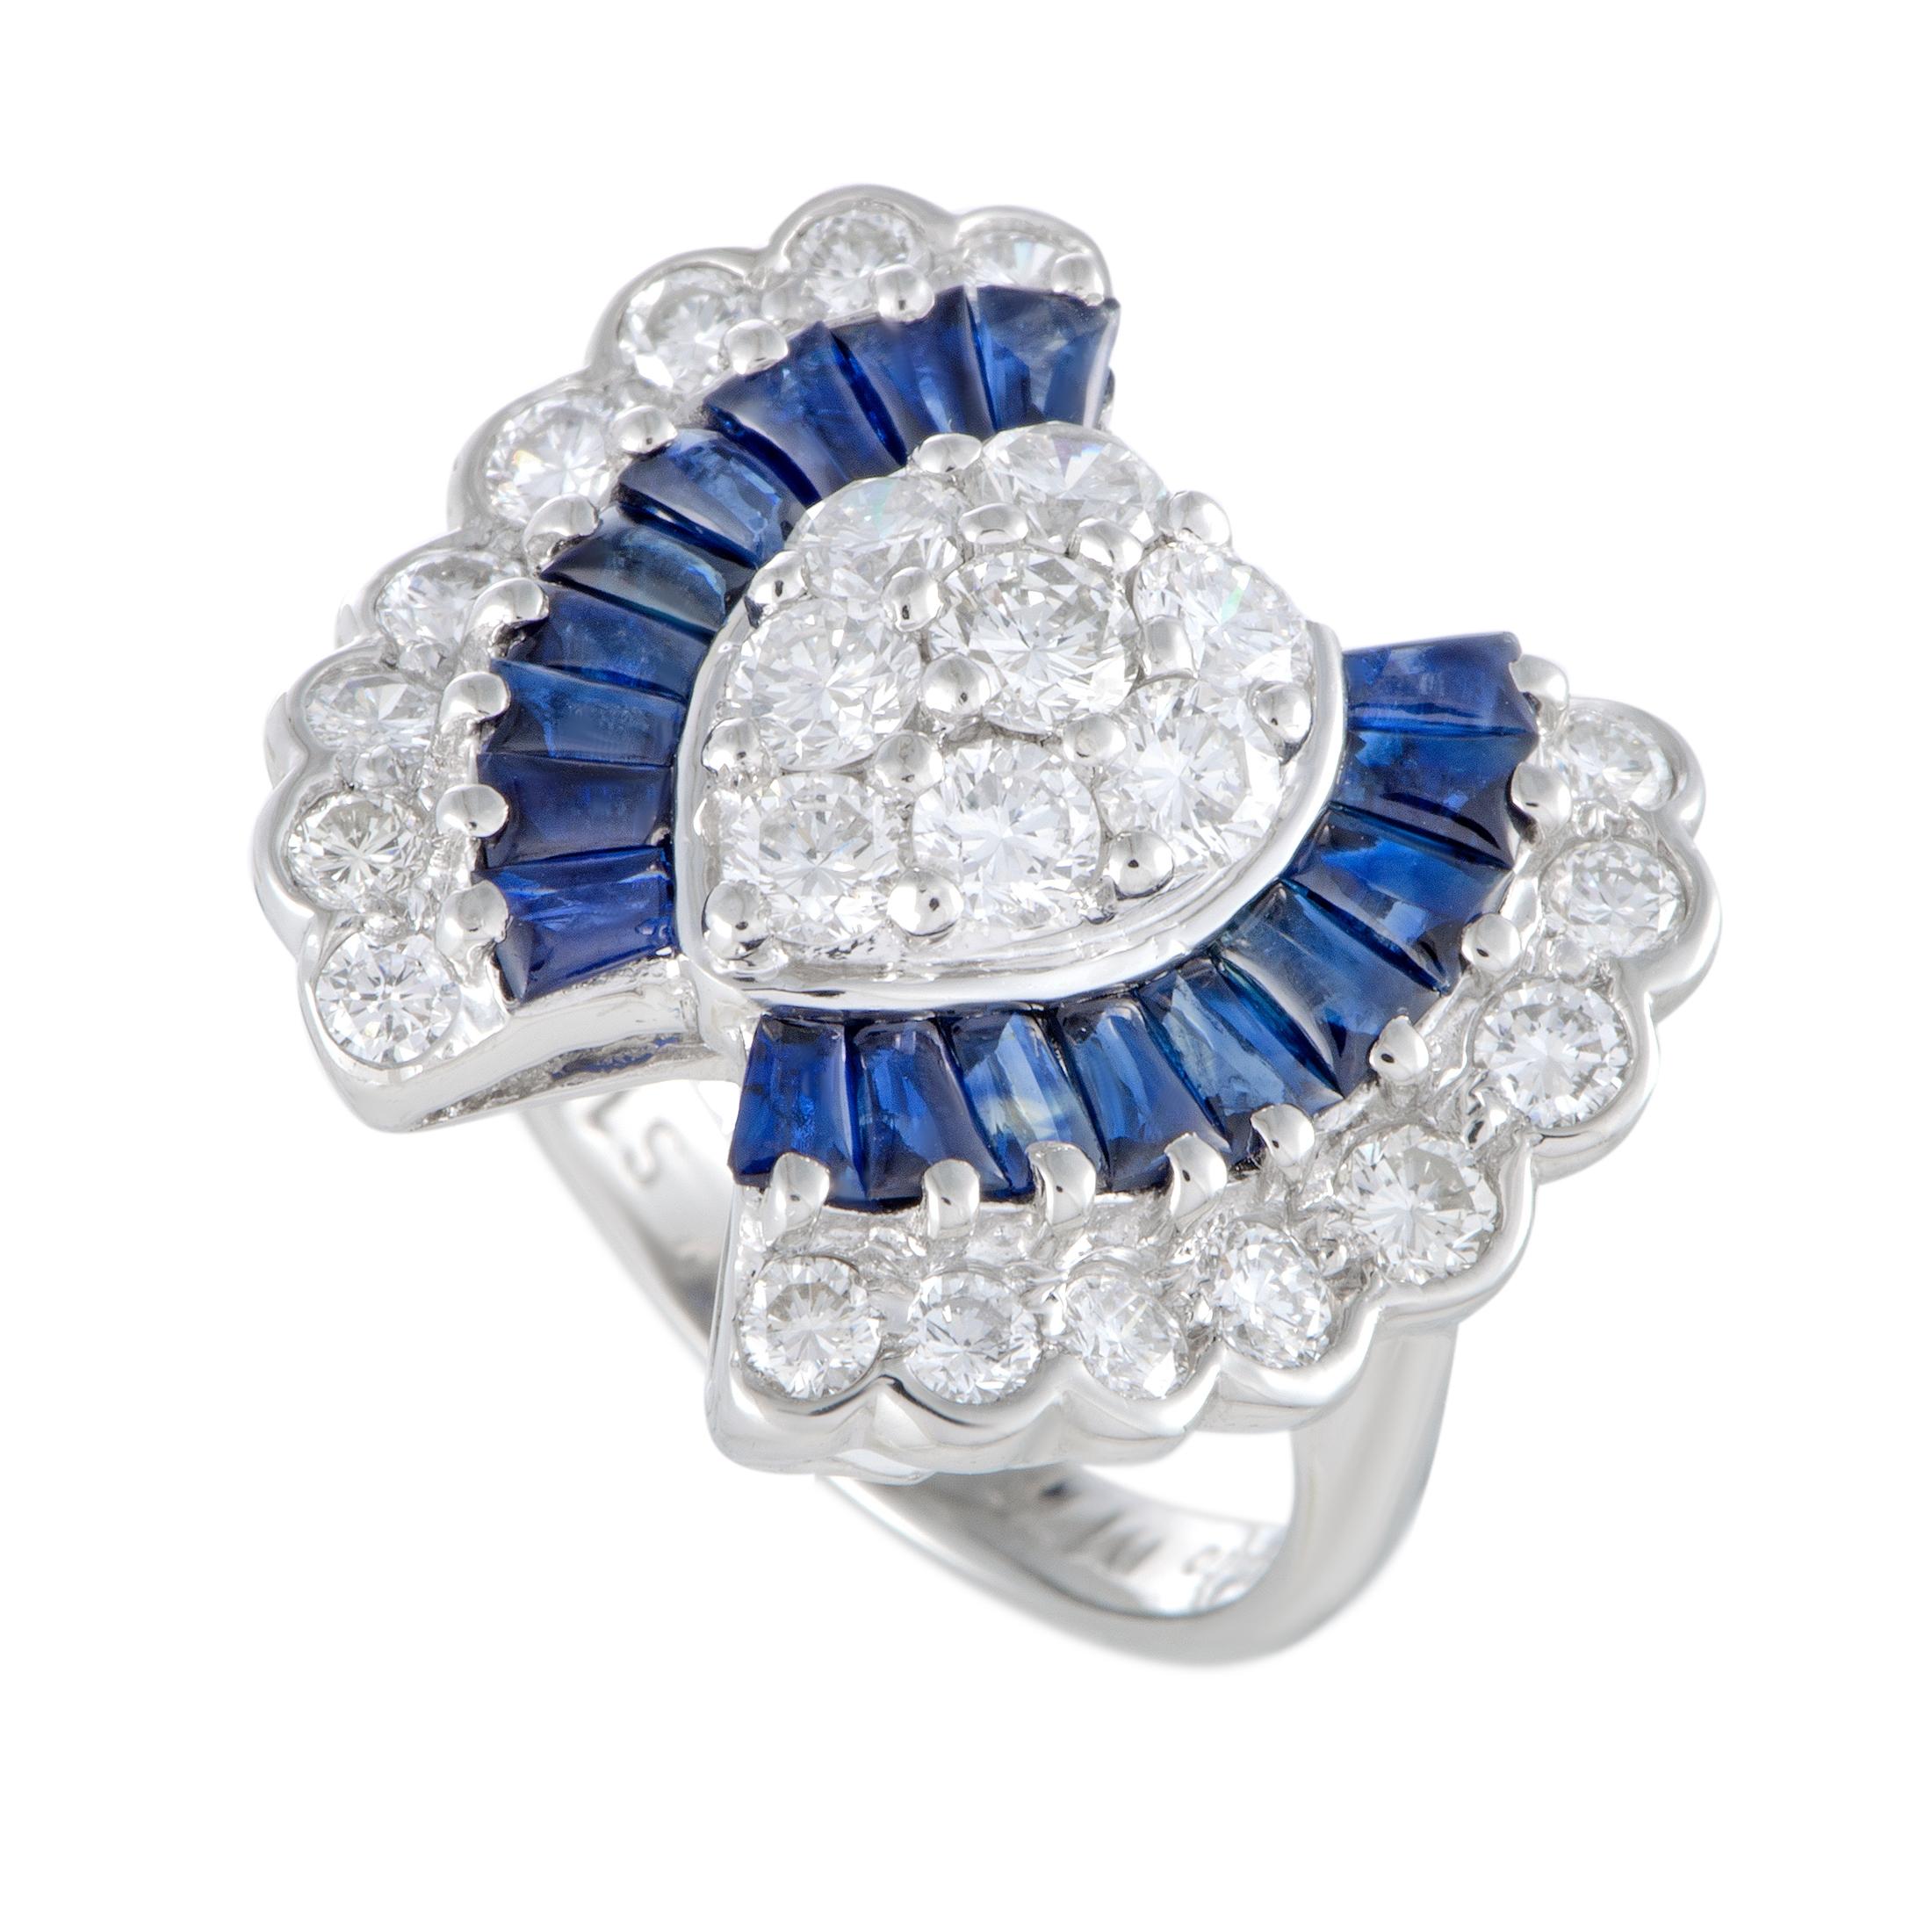 Platinum Diamond and Tapered Baguette Sapphires Ring